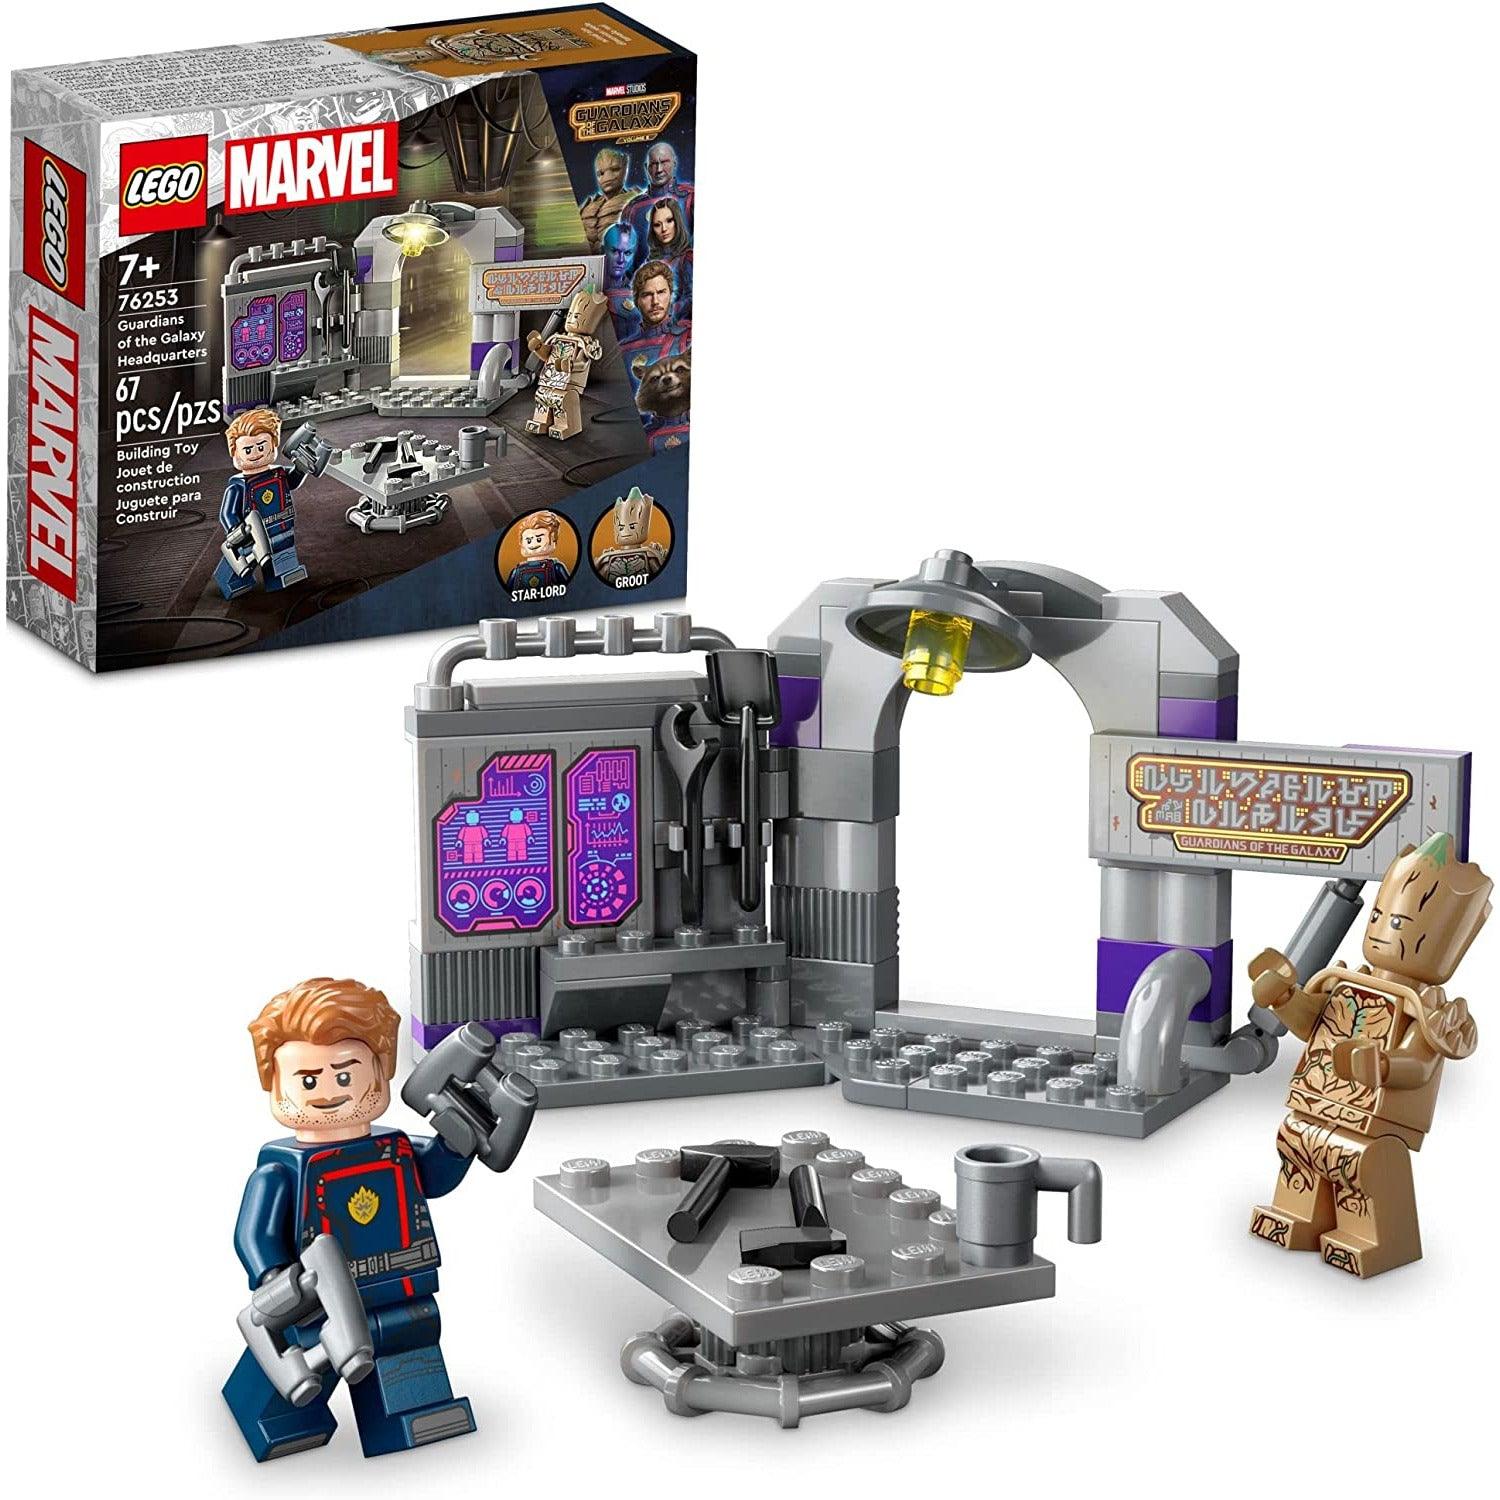 LEGO 76253 Marvel Guardians of The Galaxy Headquarters, Super Hero Building Toy Set - BumbleToys - 14 Years & Up, 18+, Boys, LEGO, Marvel, OXE, Pre-Order